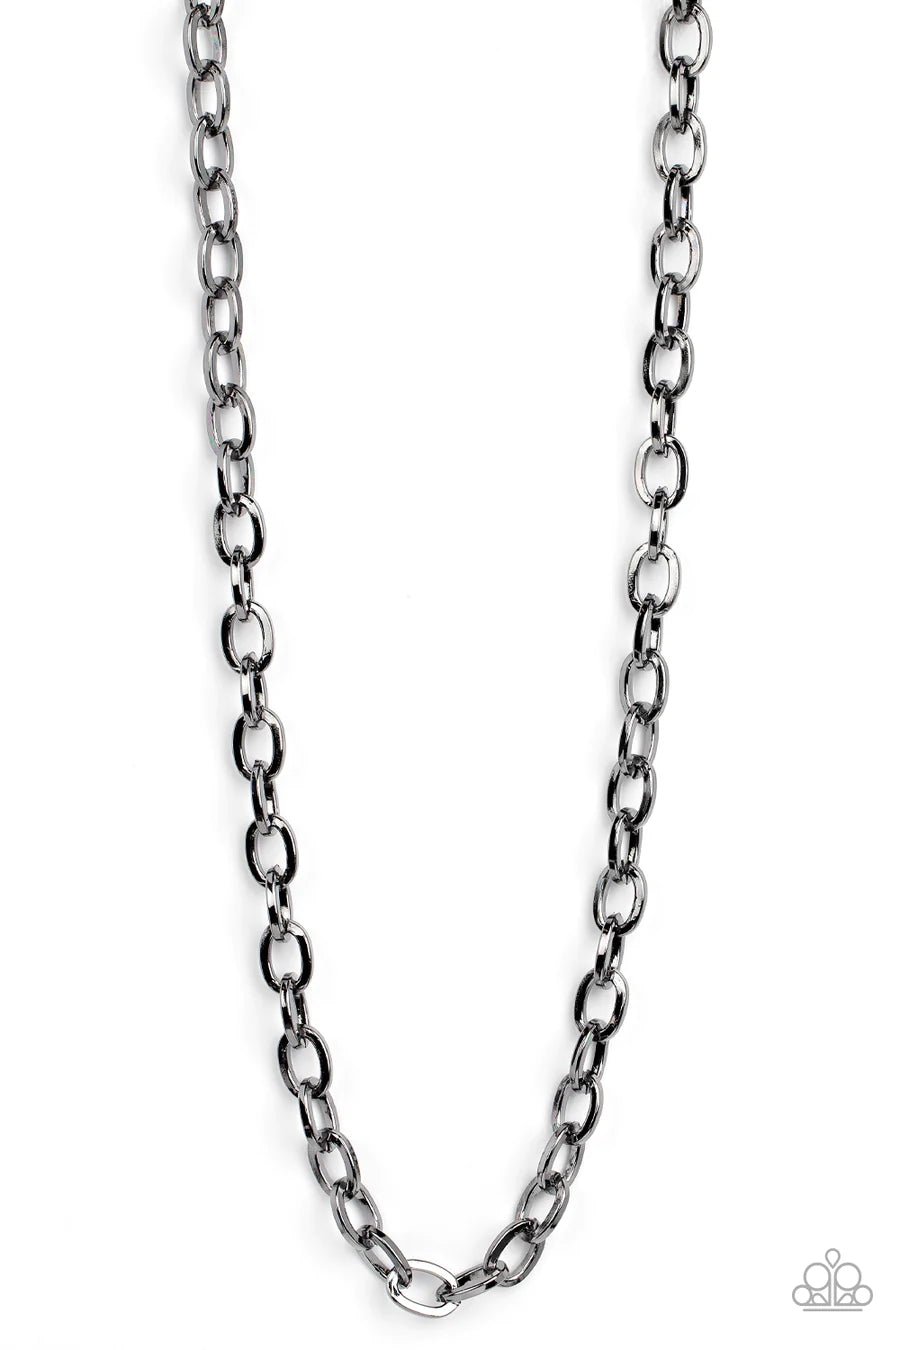 Player of the Year - Black Gunmetal Chain Urban Necklace